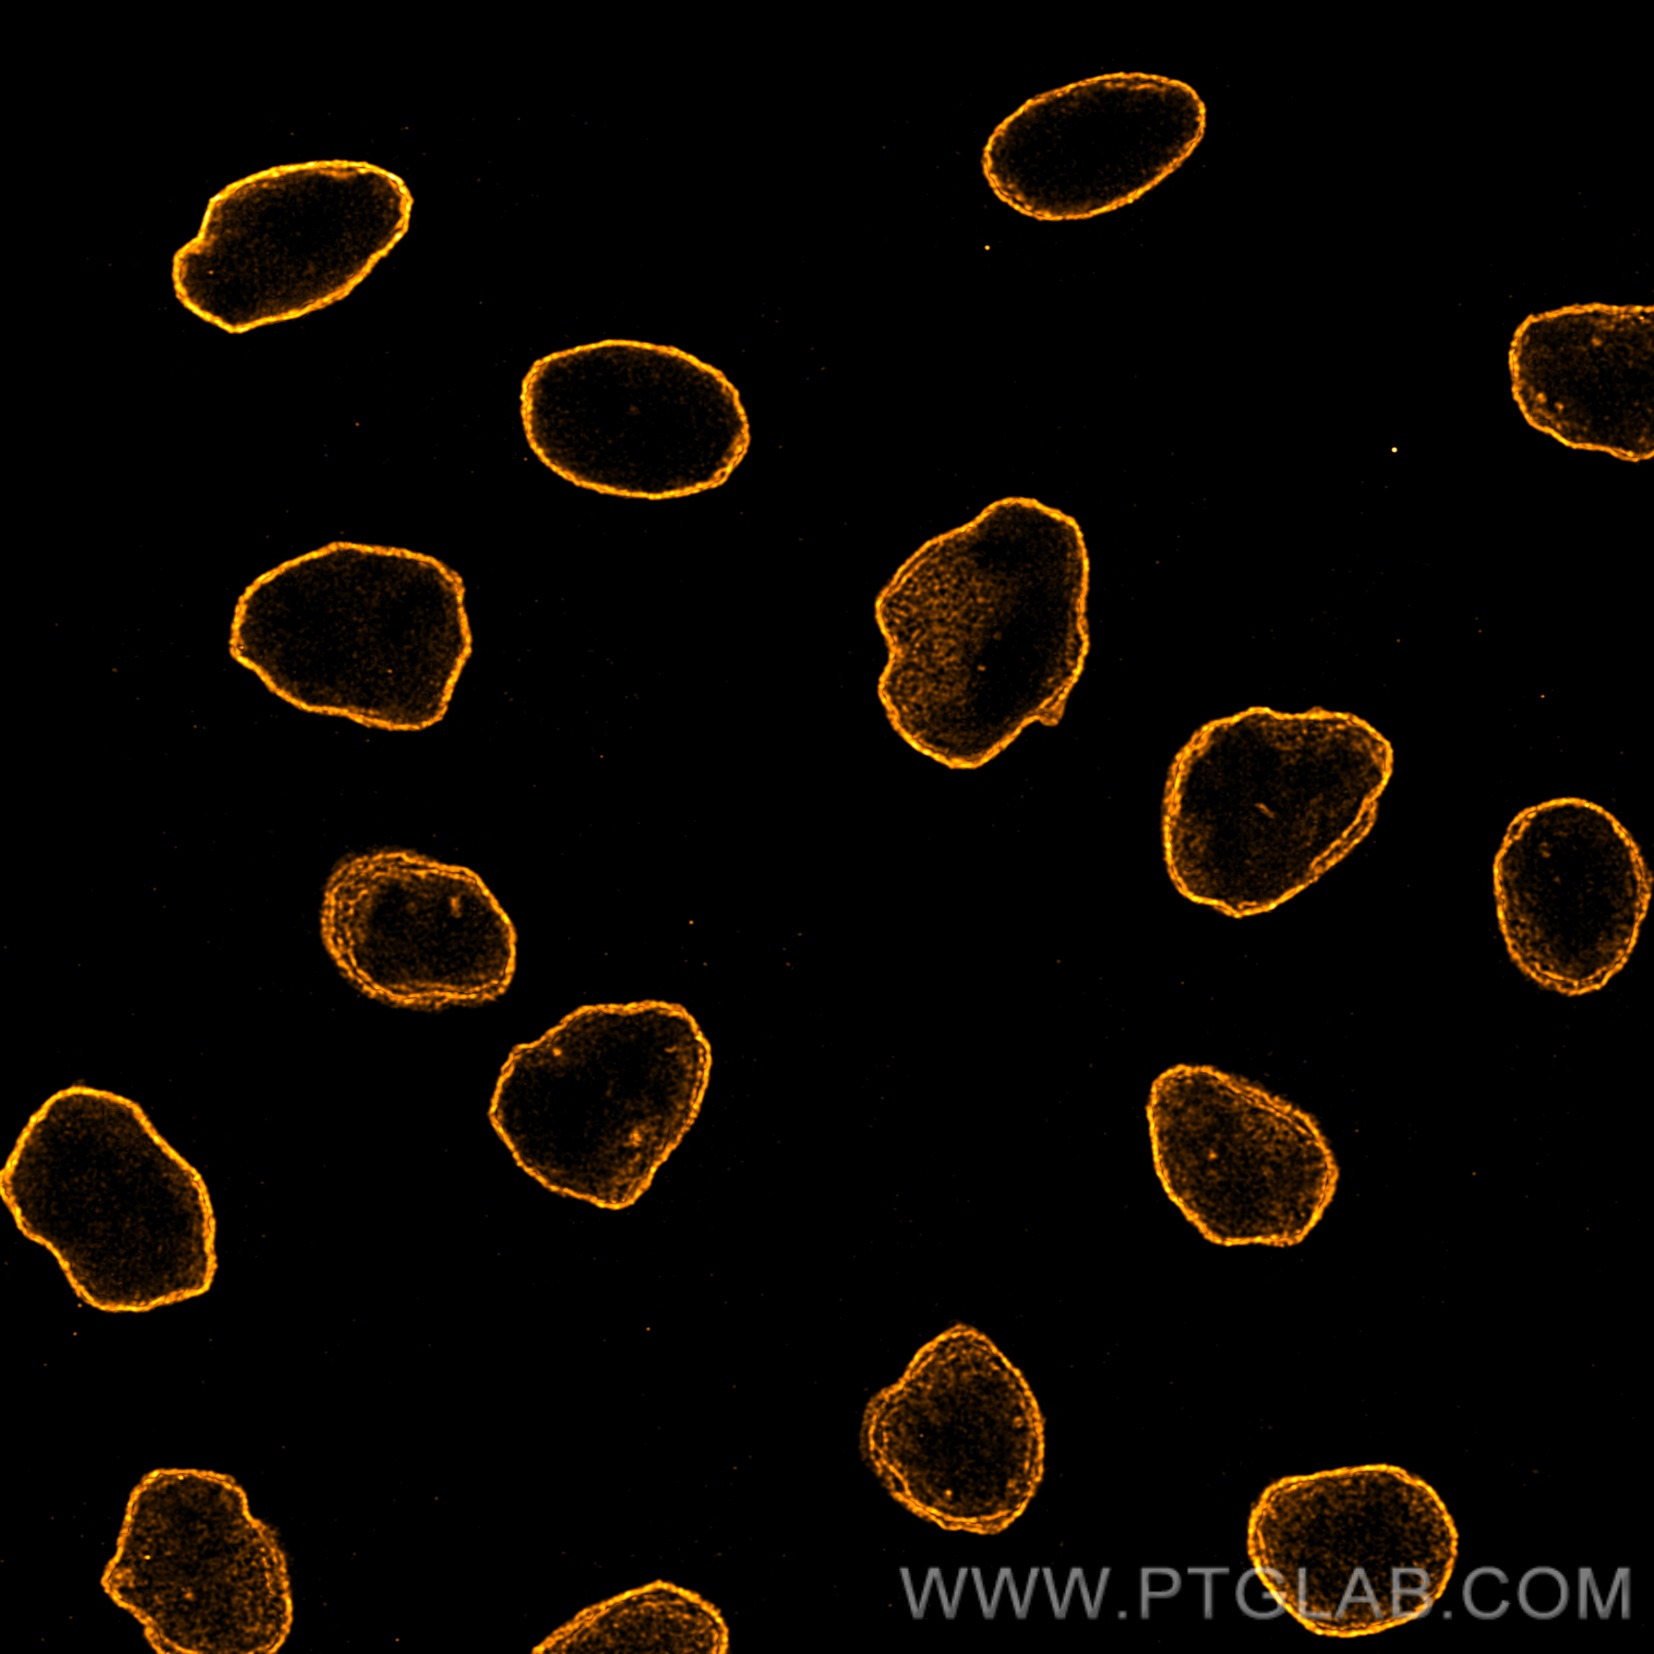 Immunofluorescence of HeLa: PFA-fixed HeLa cells were stained with anti-Lamin antibody labeled with FlexAble CoraLite® Plus 555 Kit (KFA062, orange). Confocal images were acquired with a 100x oil objective and post-processed. Images were recorded at the Core Facility Bioimaging at the Biomedical Center, LMU Munich.